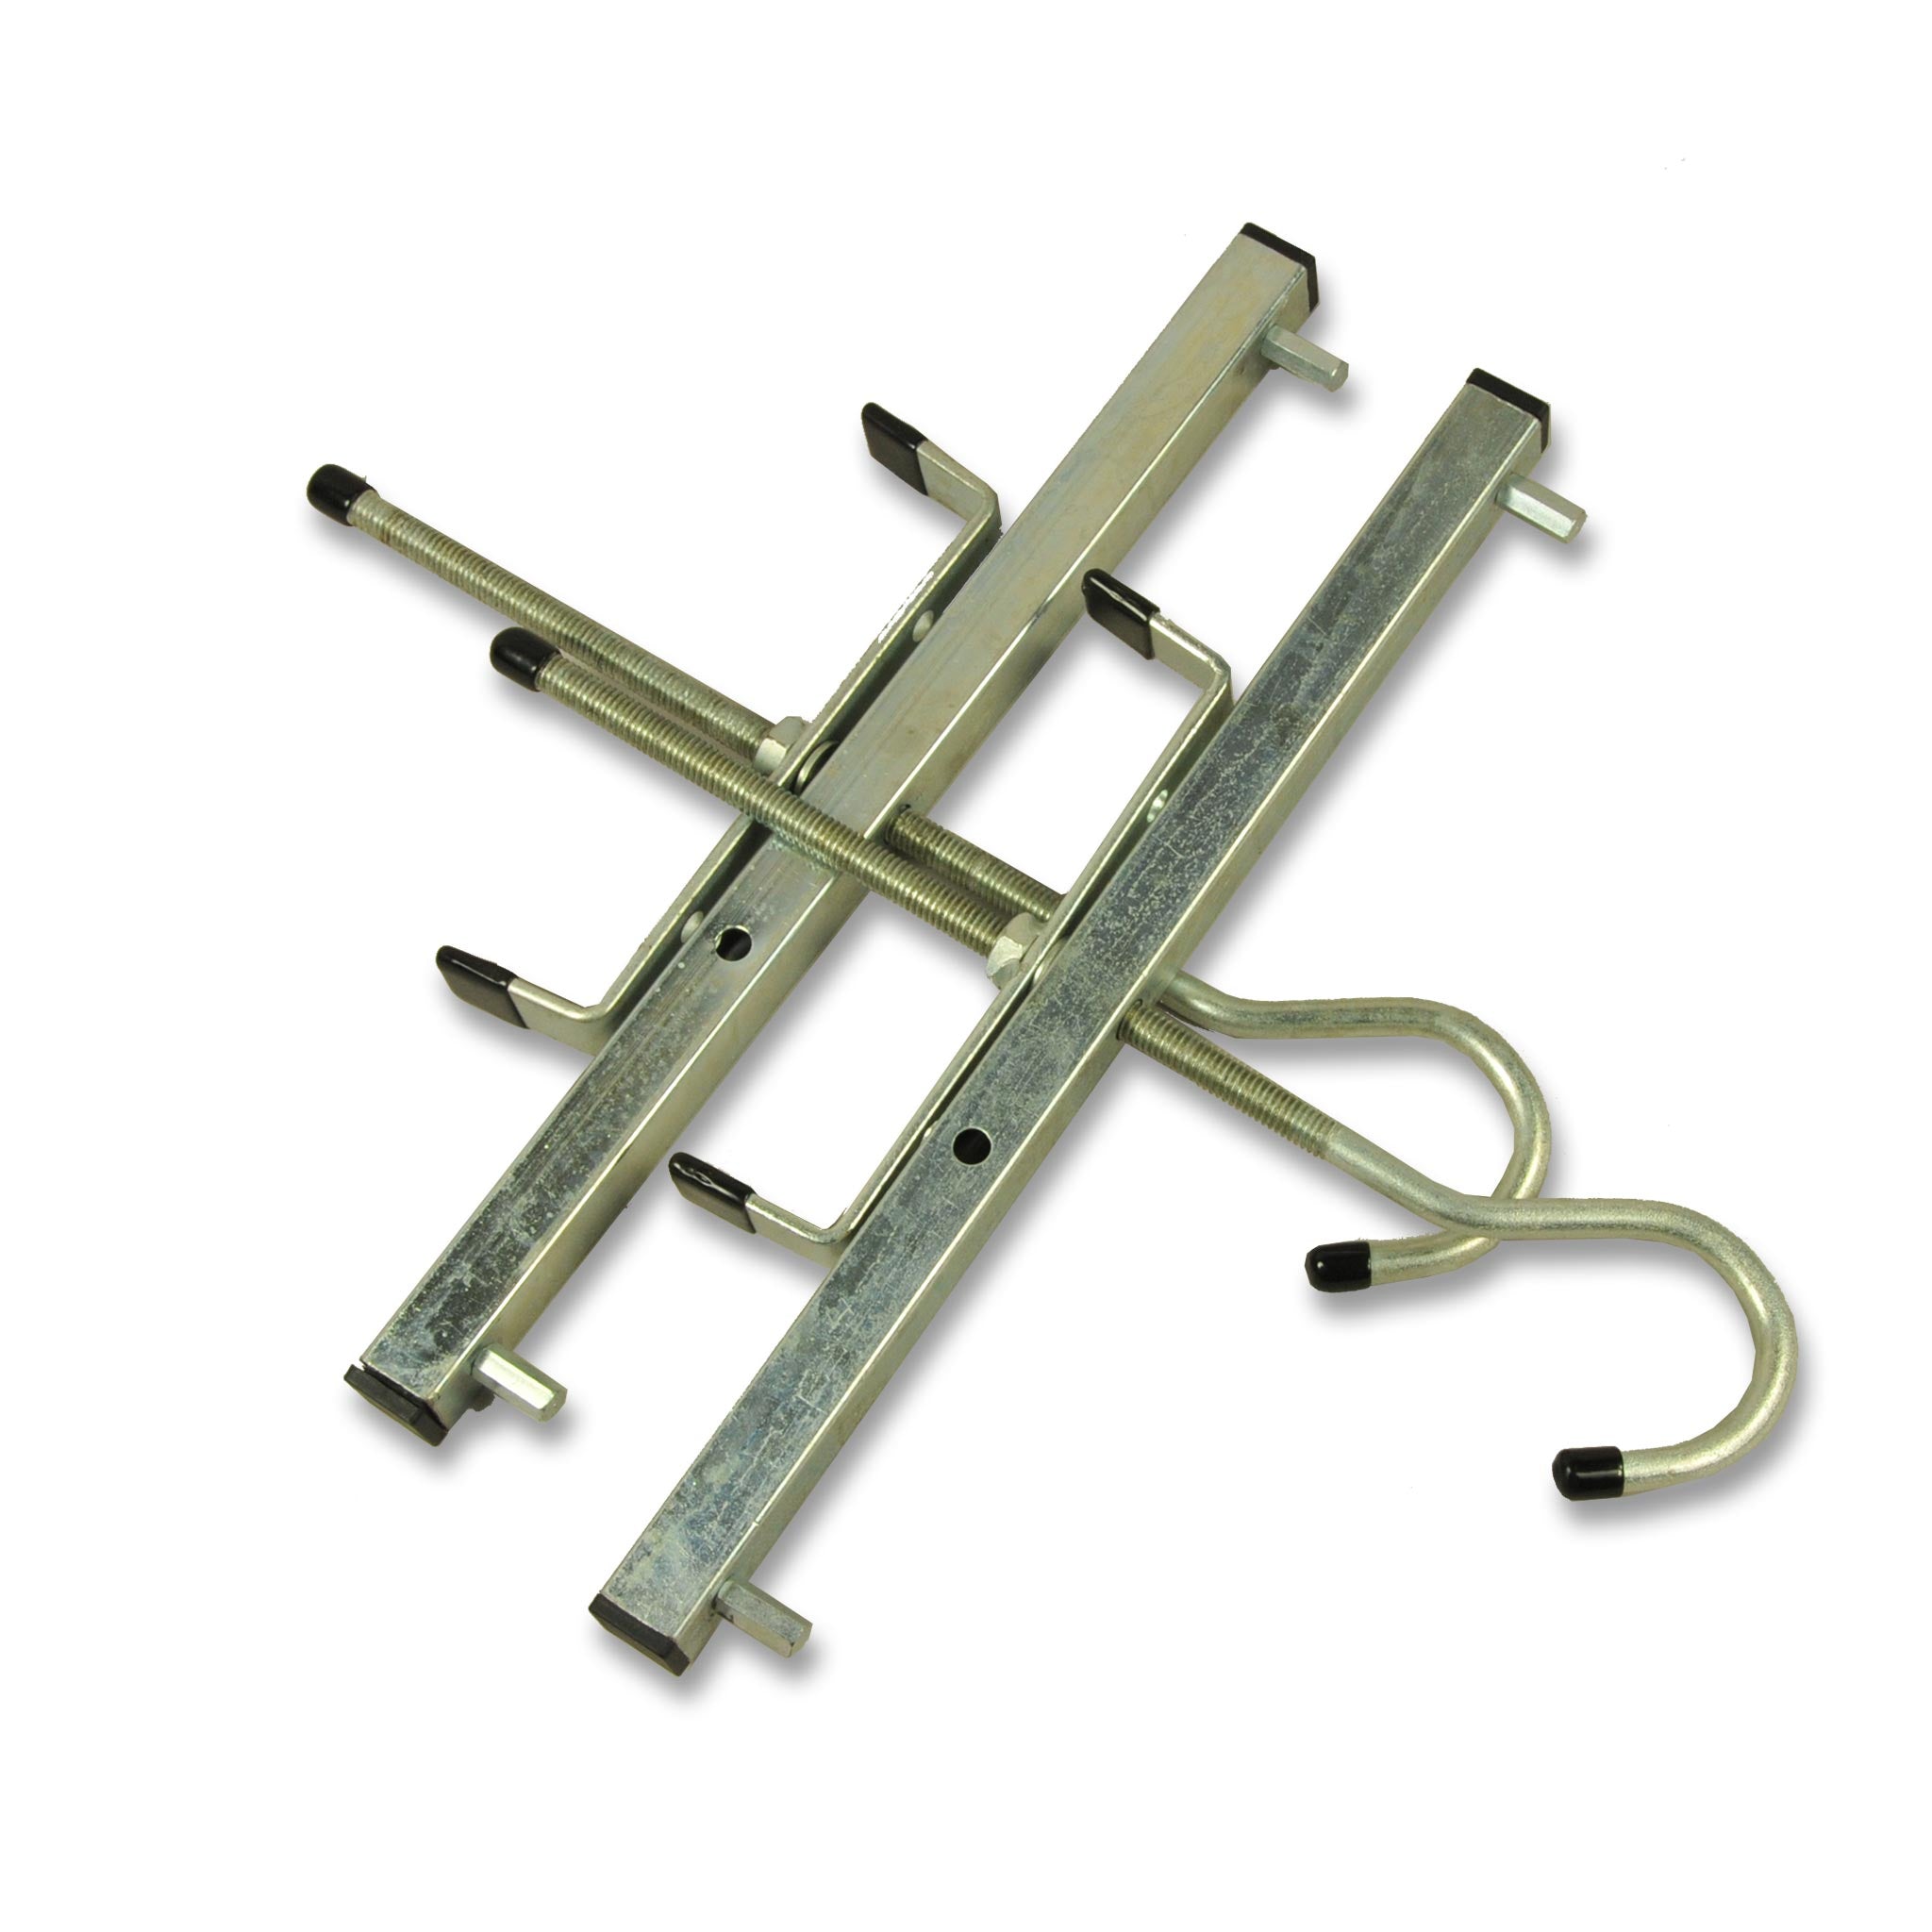 Racktite - Ladder Clamps